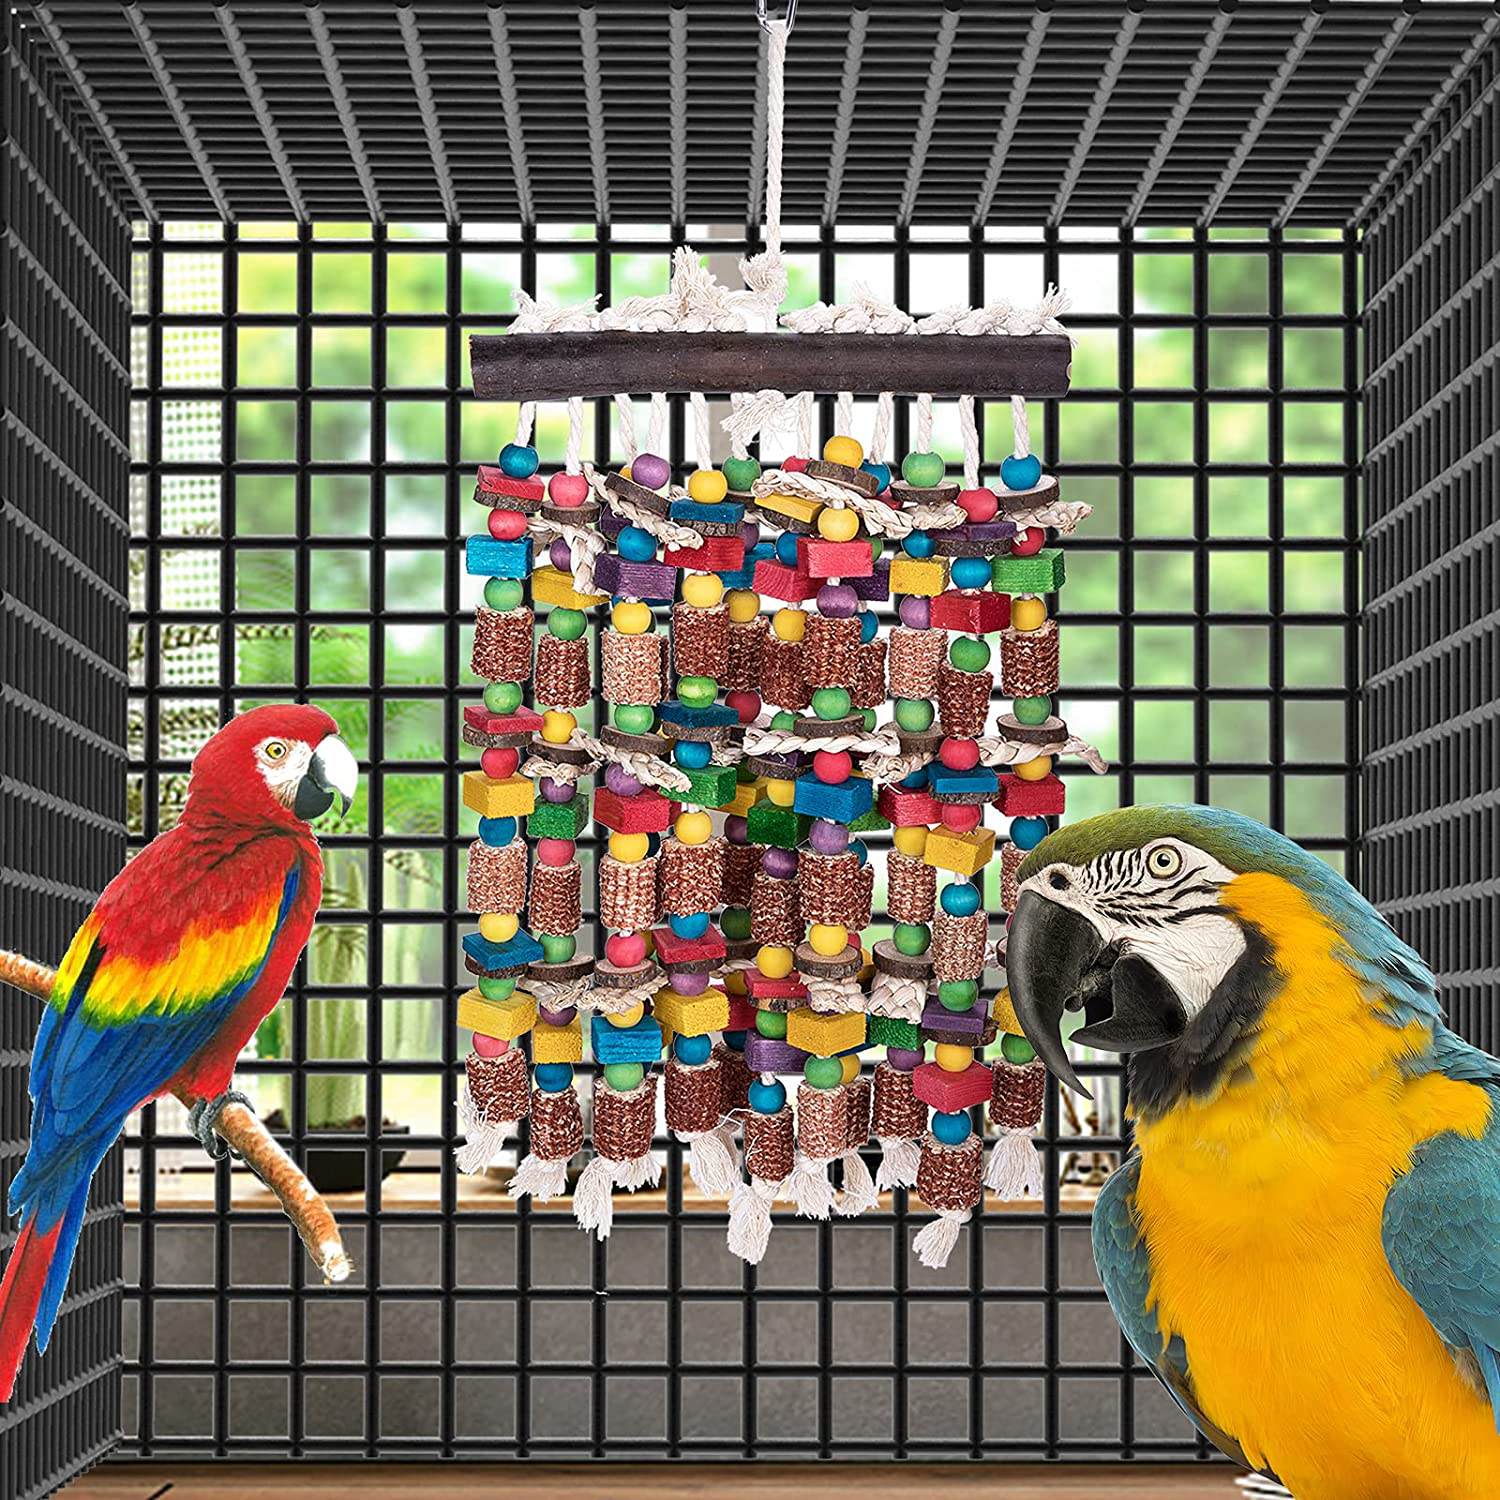 Wehhbtye Super Large Bird Parrot Macaw Chewing Toy-27''X11'' Multicolor Natural Wood Block Knot Bird Bite Tearing Toy,Parrot Corn Cob Chewing Toy for Macaws Cokatoos,African Grey,All Amazona Parrot Animals & Pet Supplies > Pet Supplies > Bird Supplies > Bird Toys Wehhbtye   